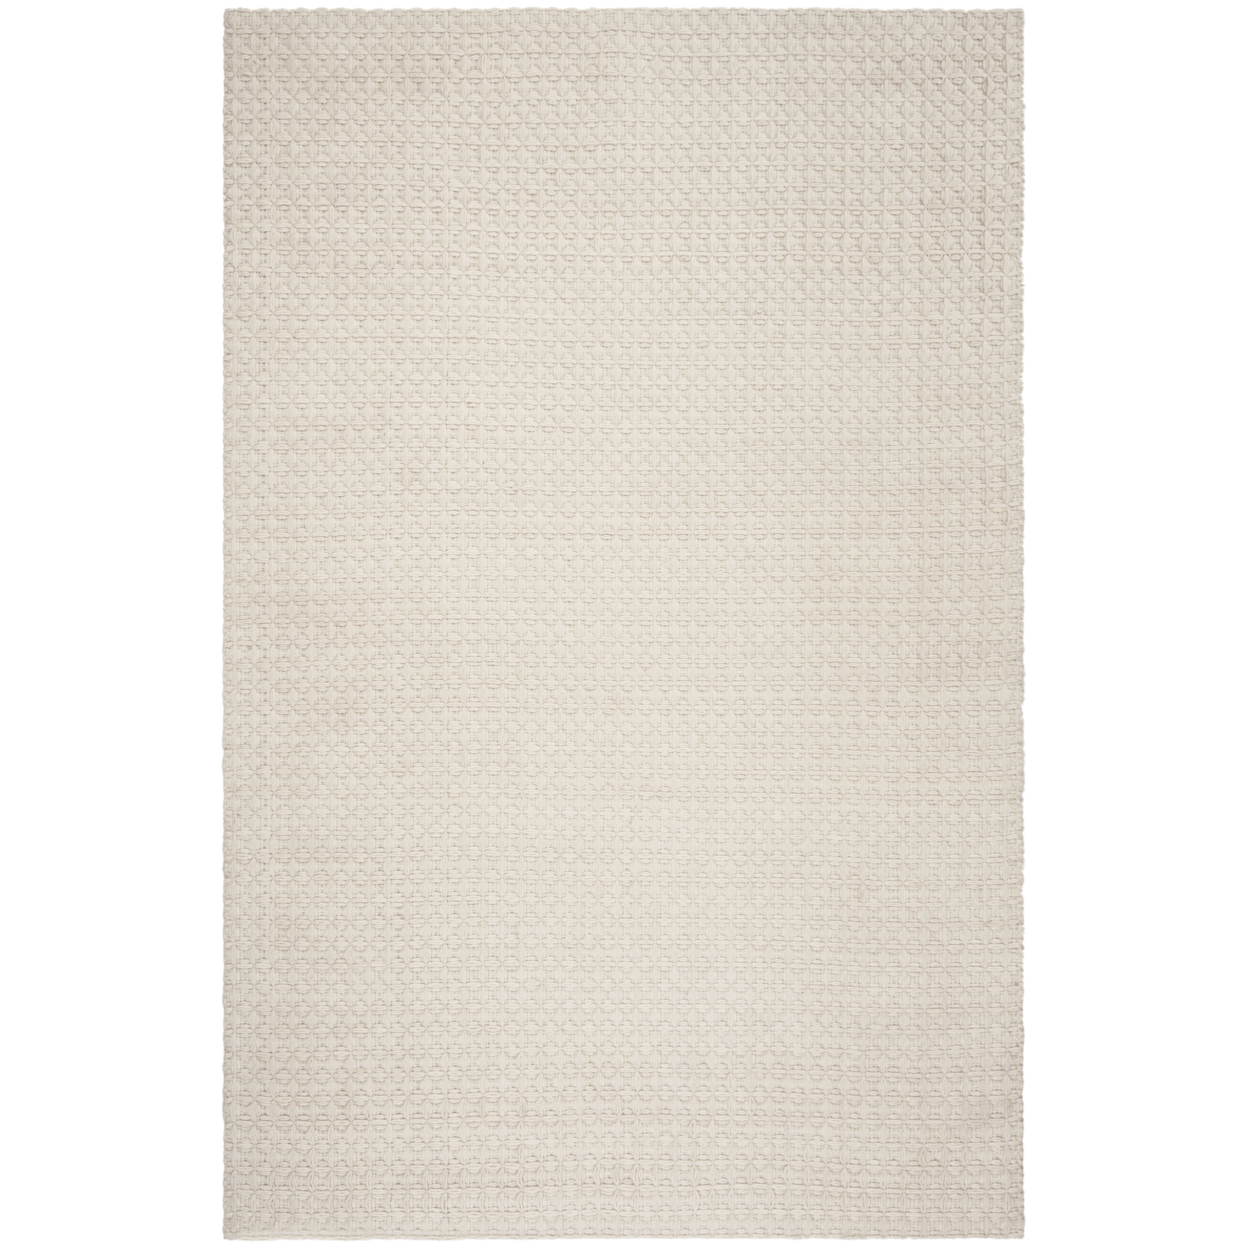 SAFAVIEH Natura Collection NAT408A Handwoven Ivory Rug - 5 X 8